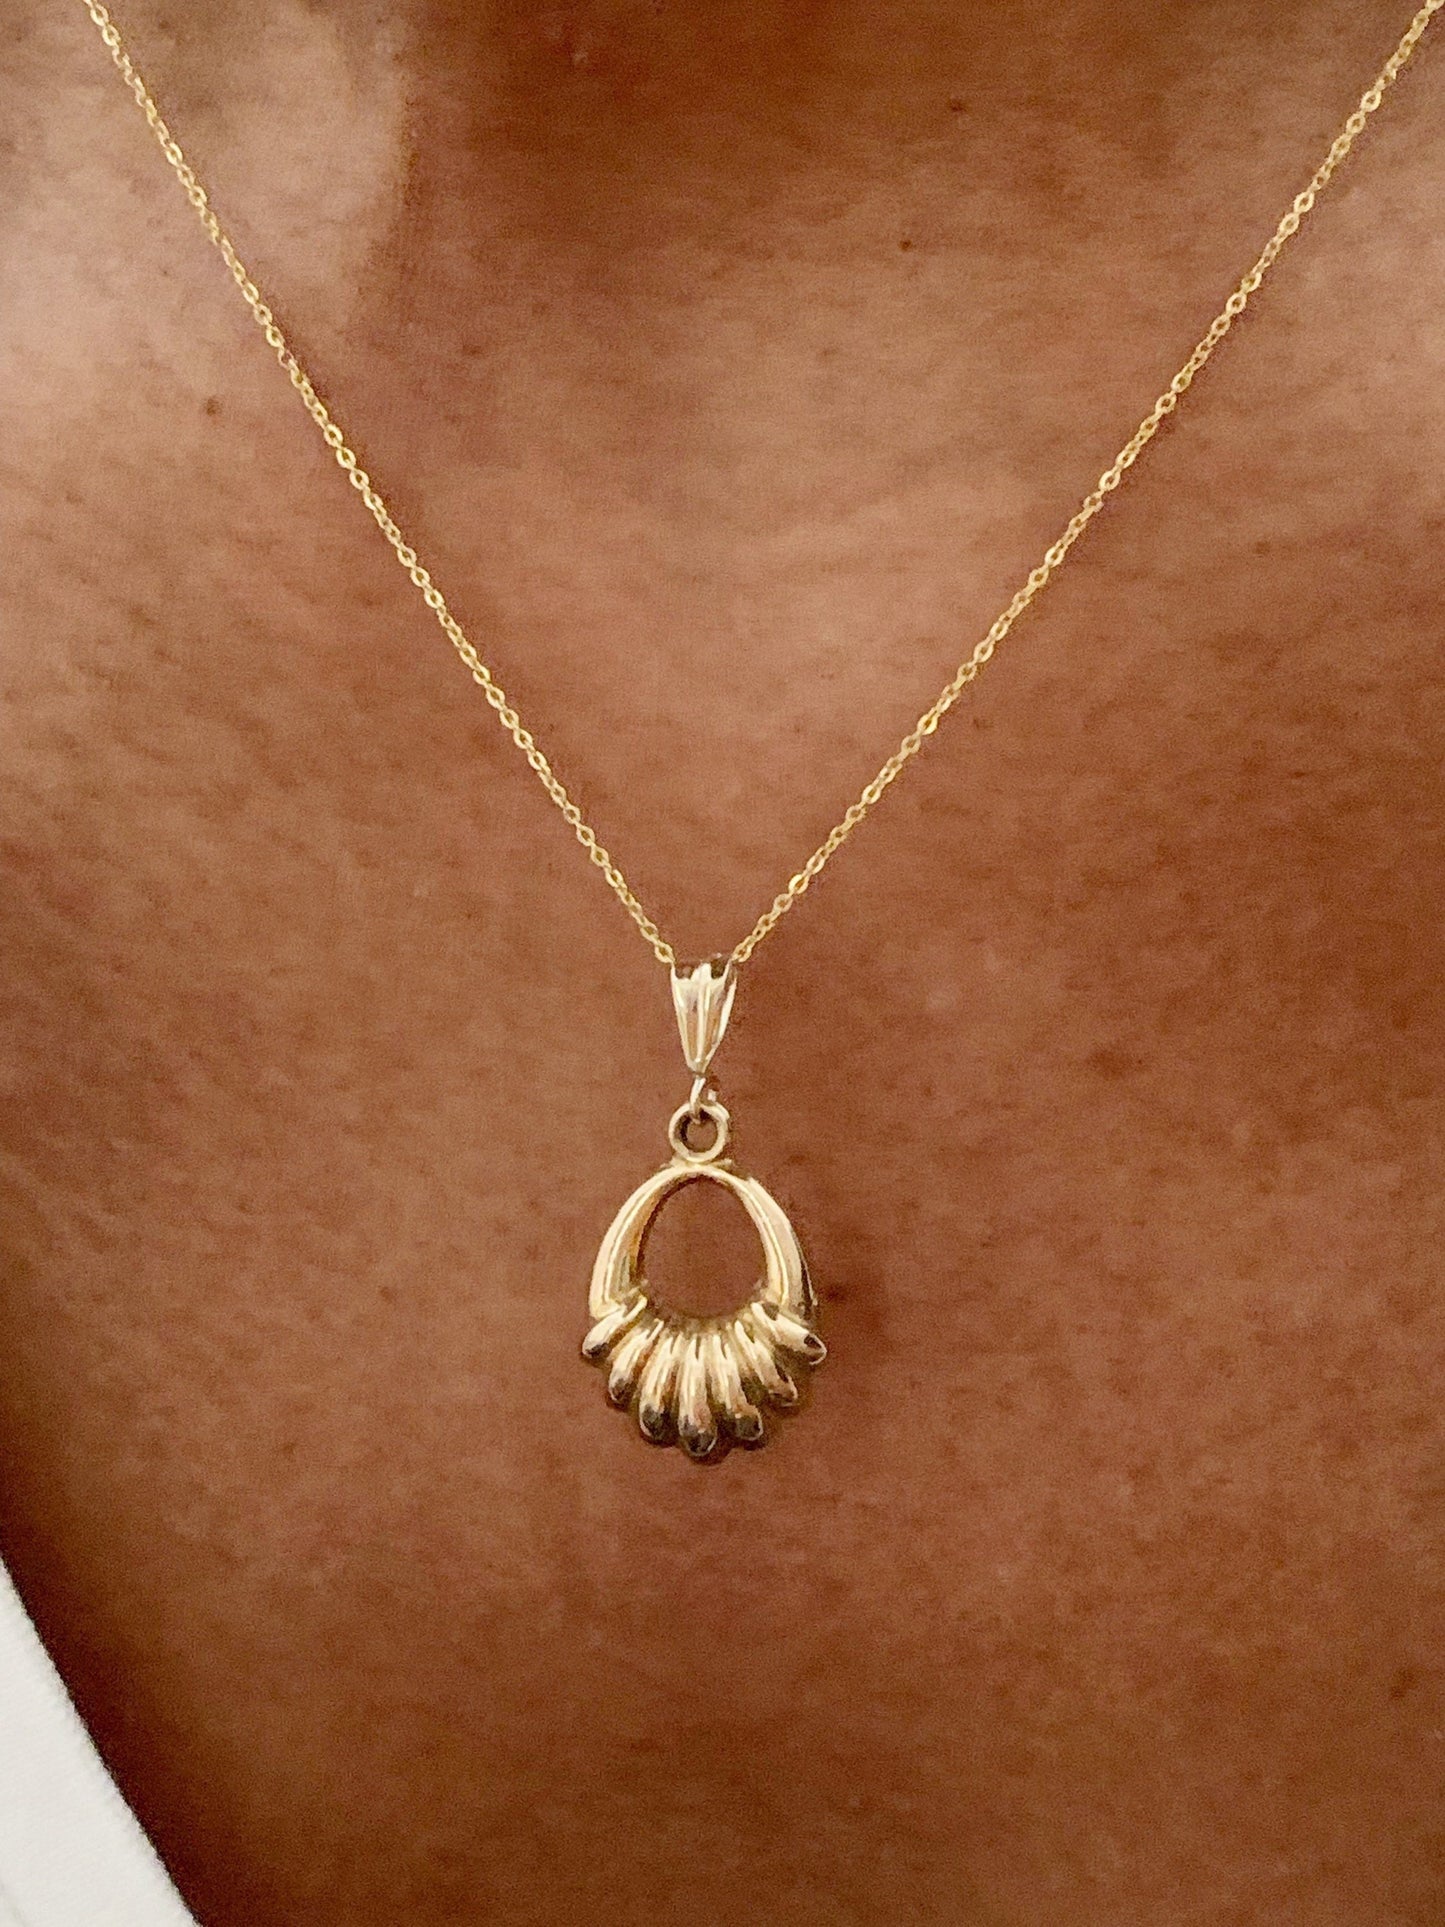 Vintage 9ct Gold Puffy Pendant Necklace